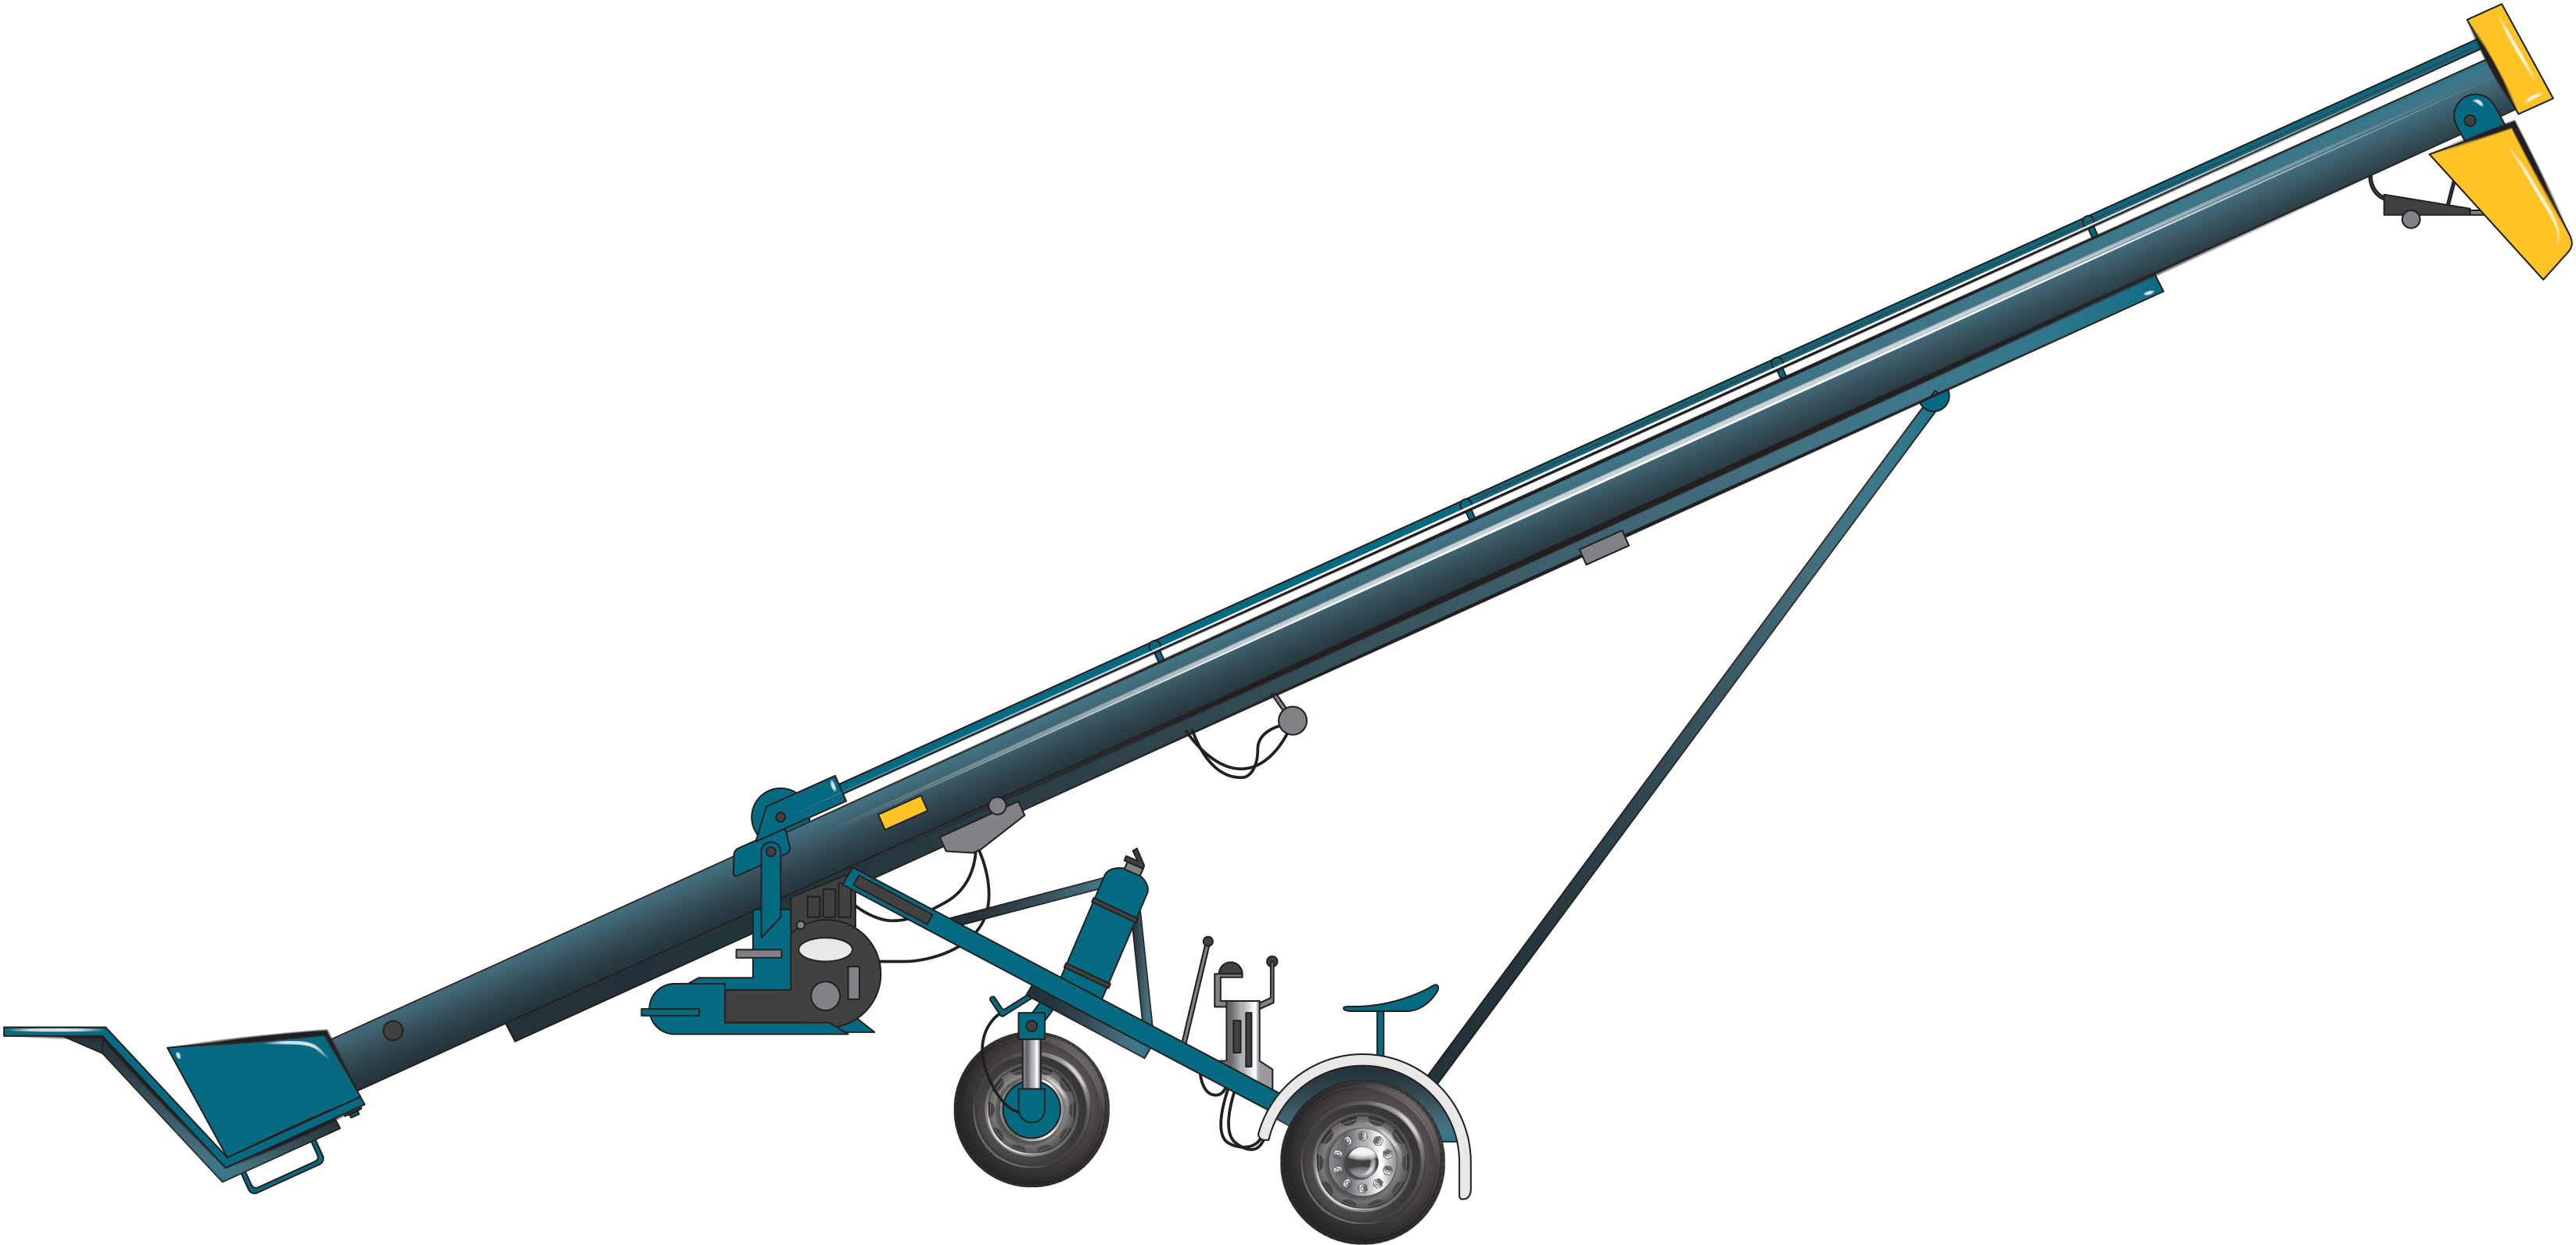 Image is of a grain auger